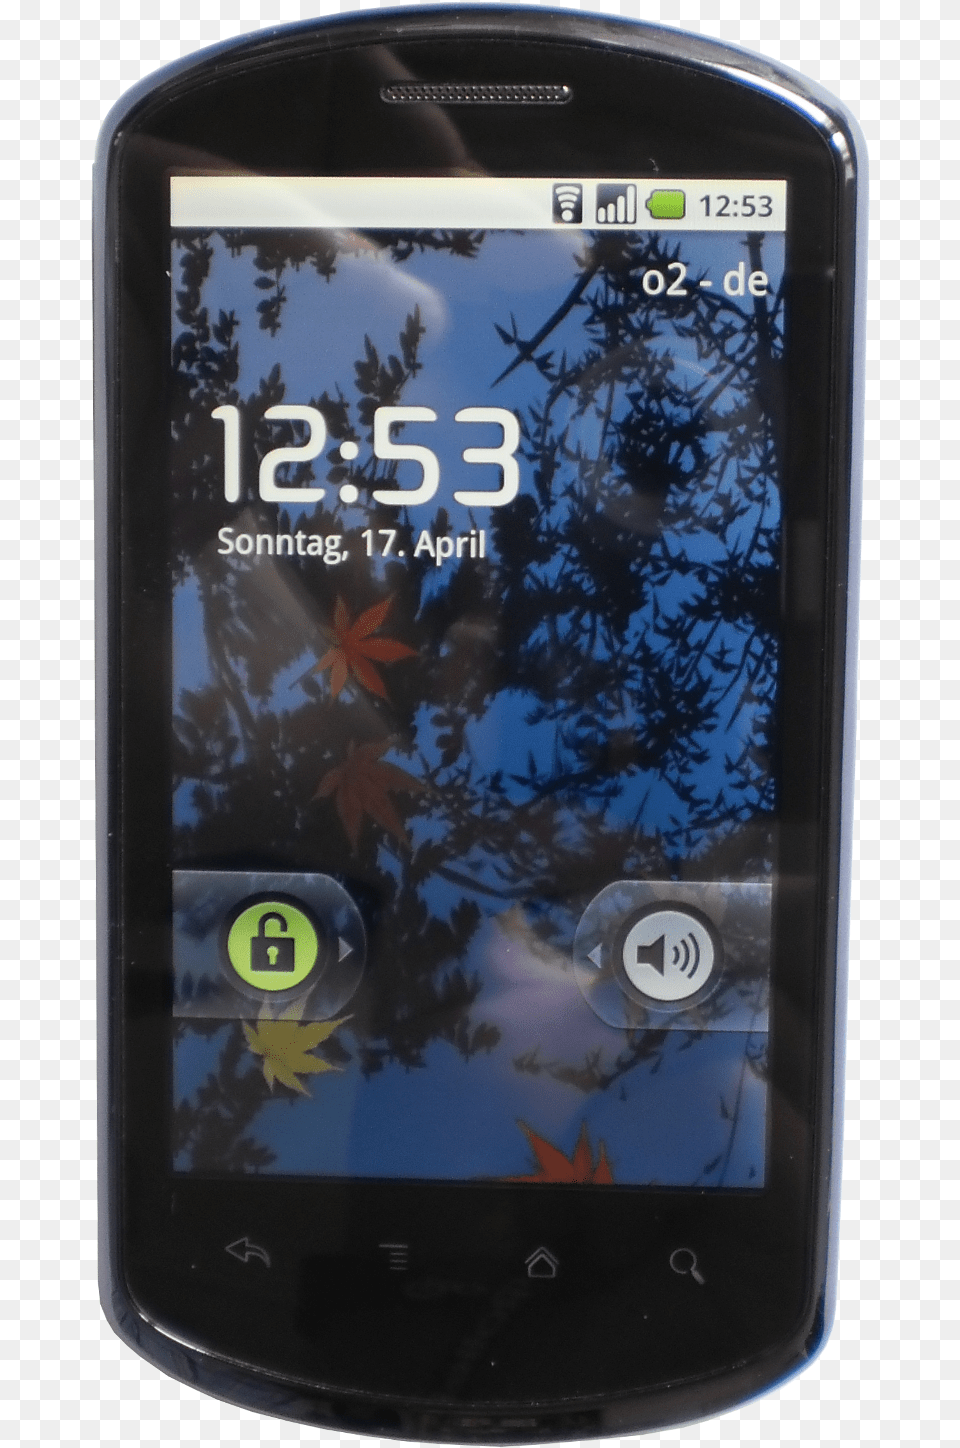 Huawei U8800 Front Htc Touch Pro2 Android, Electronics, Mobile Phone, Phone Png